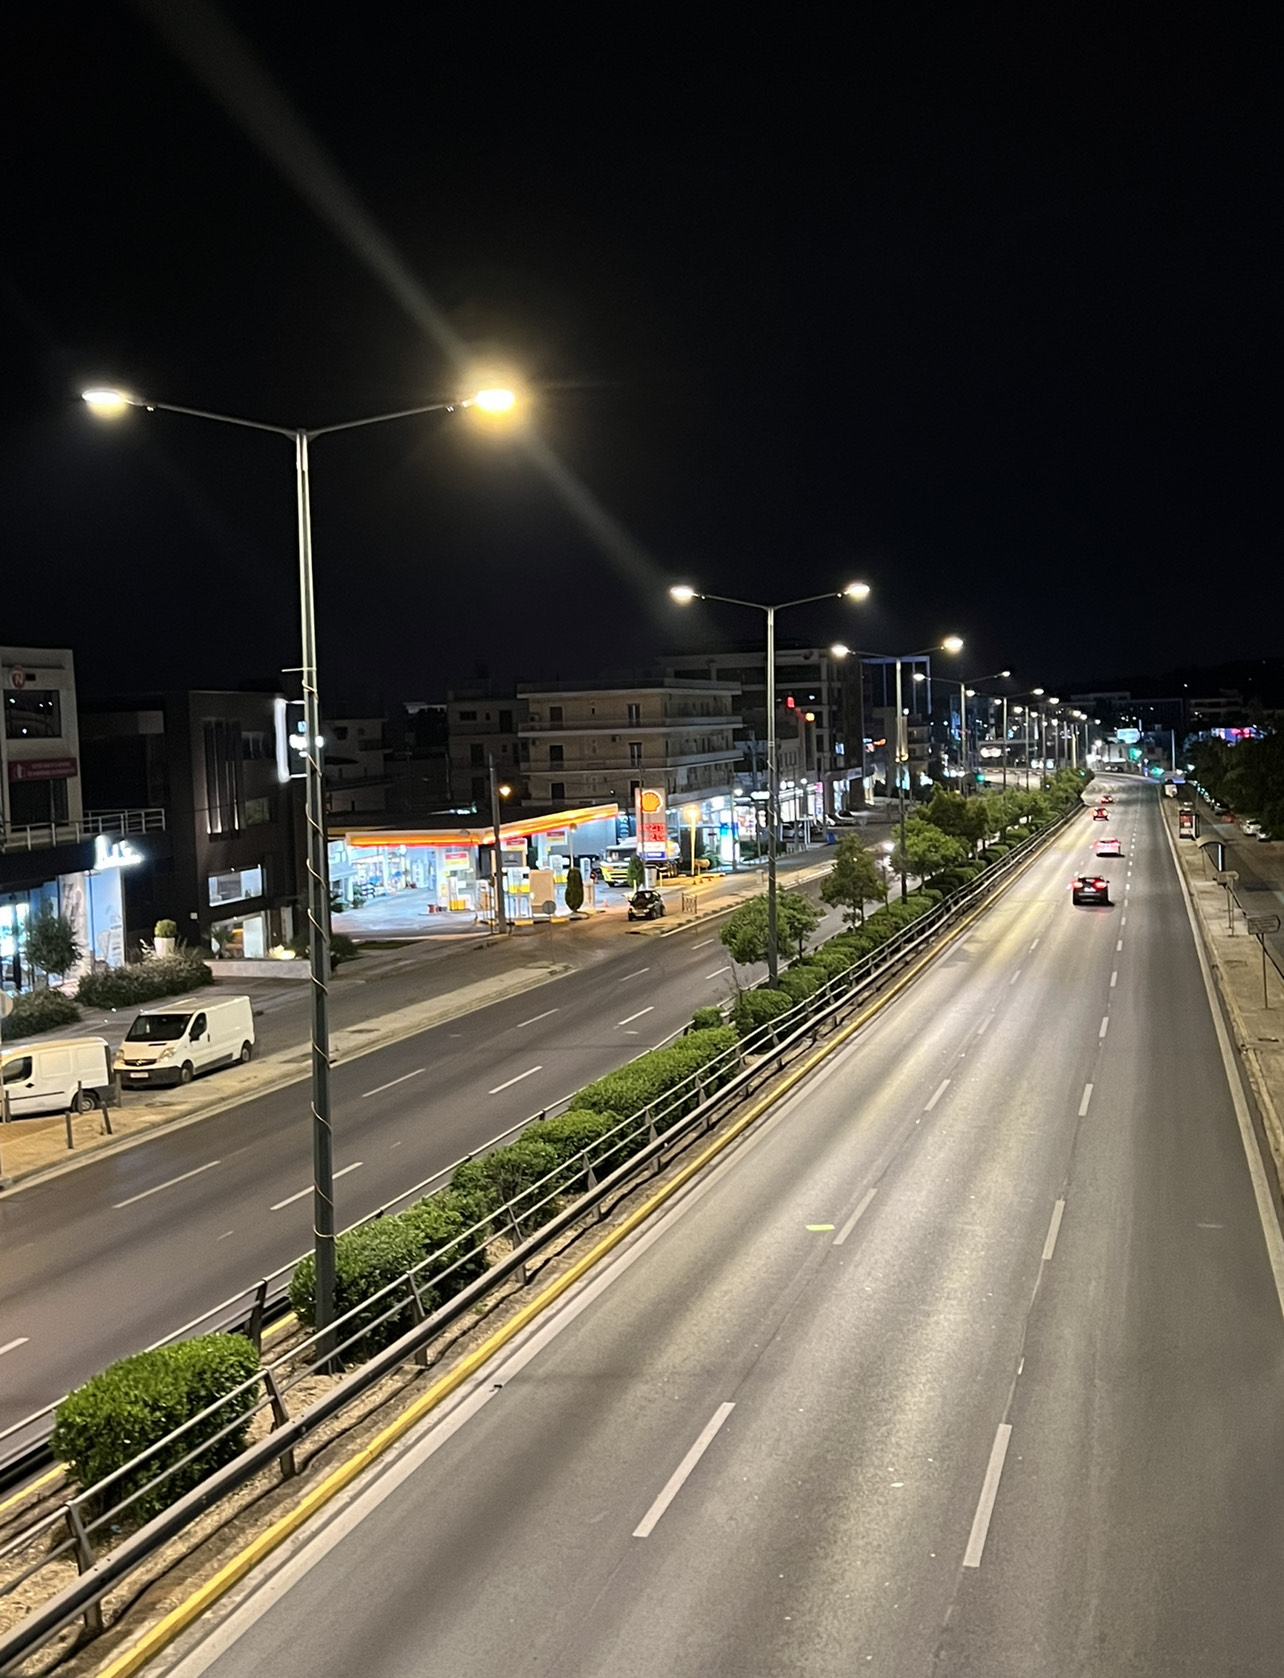 Kifissias avenue public lighting was fully upgraded with LED bulbs